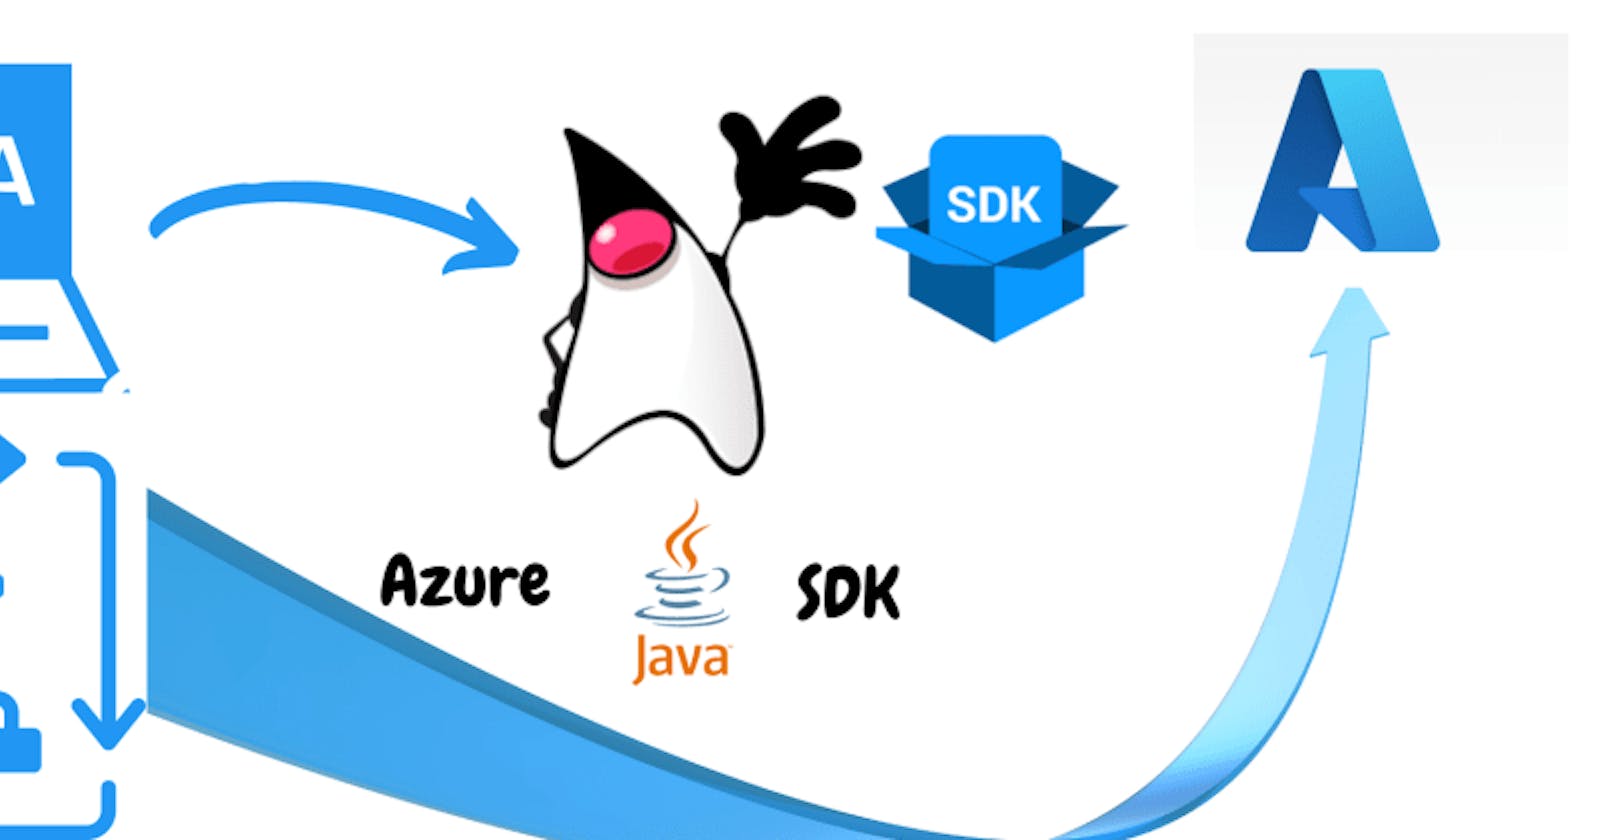 Infrastructure as code (IaC) for Java-based apps on Azure